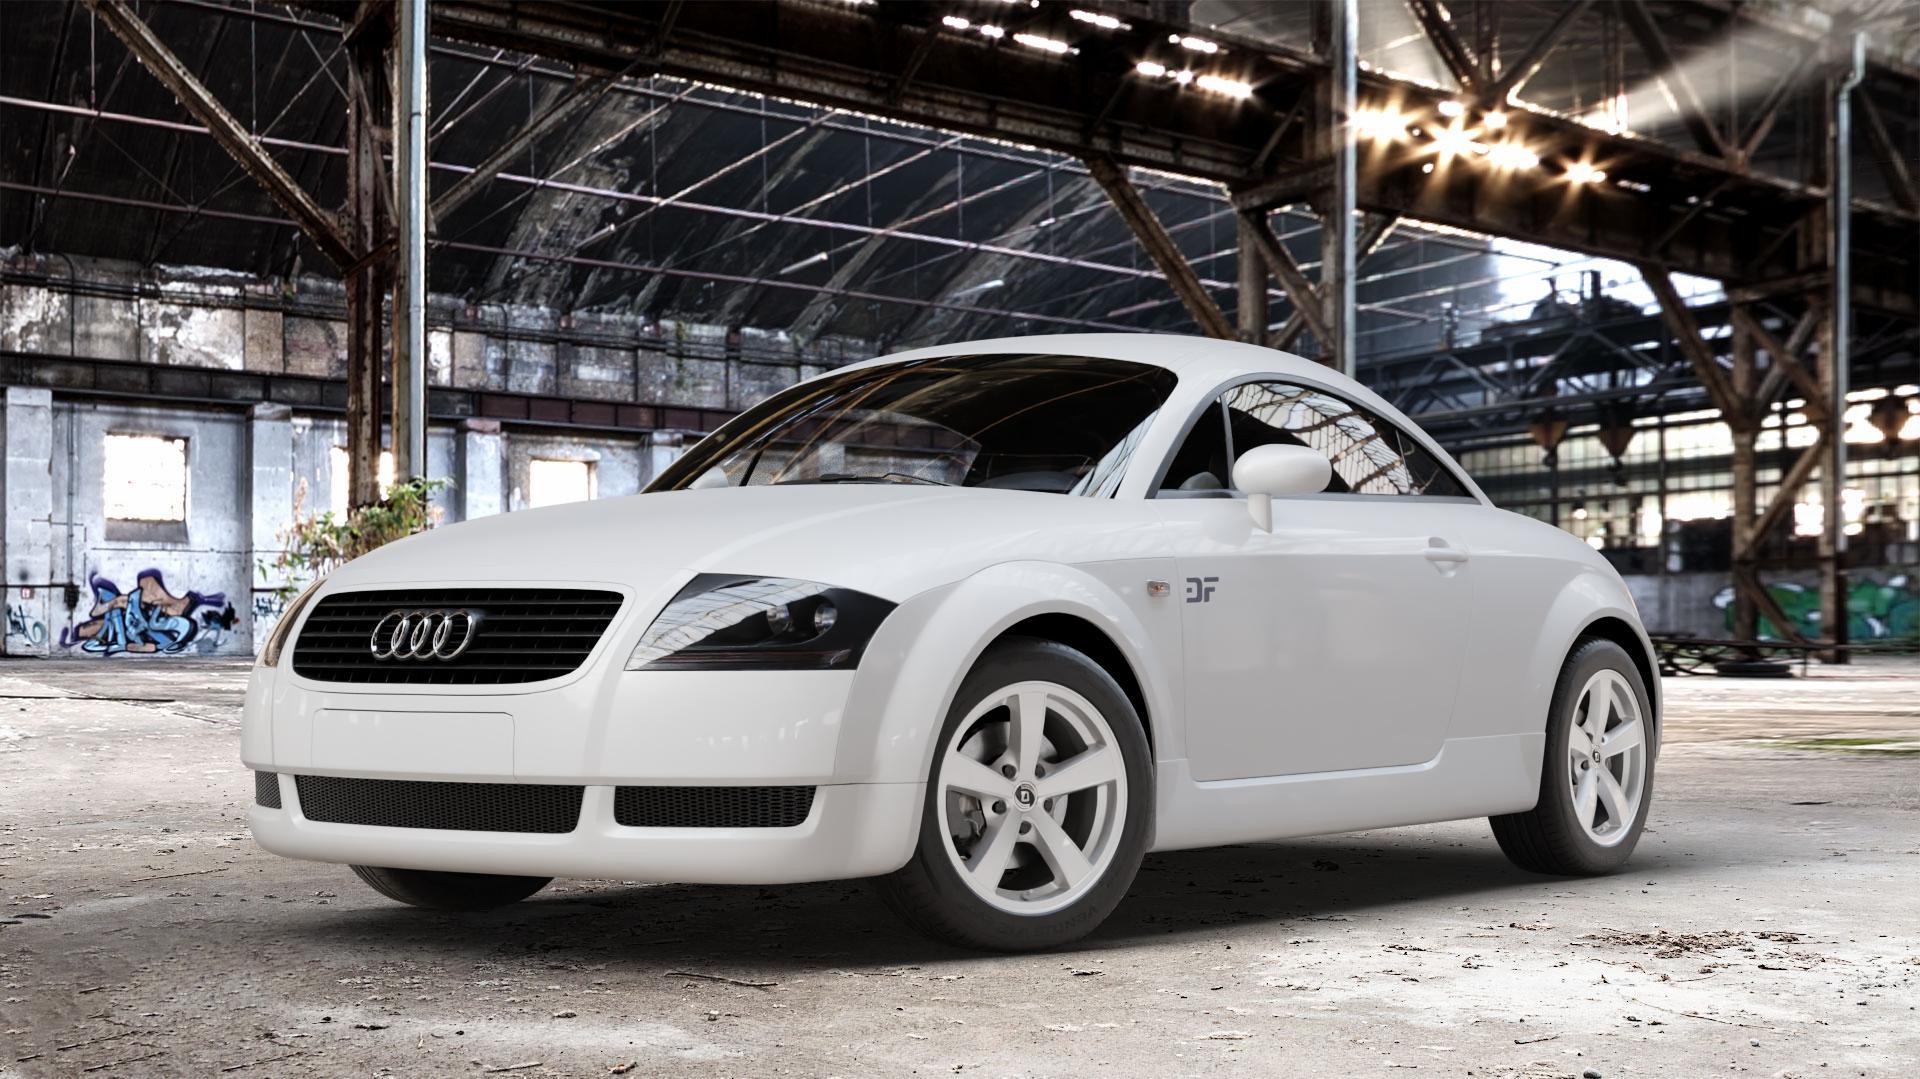 Audi Tt I Type 8n Coup 8l T 110kw Hp Wheels And Tyre